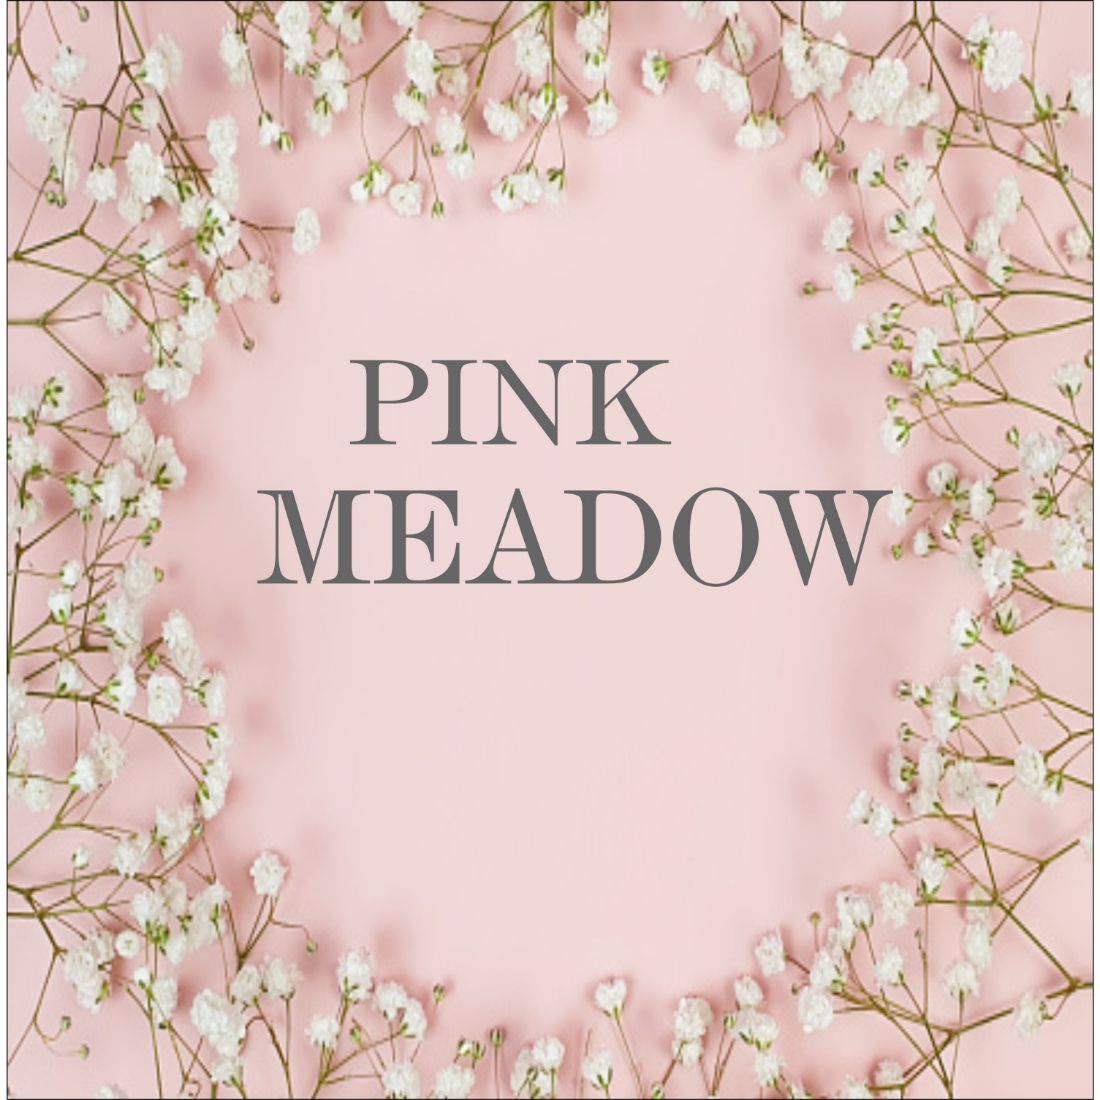 Pink meadow flower preview image.